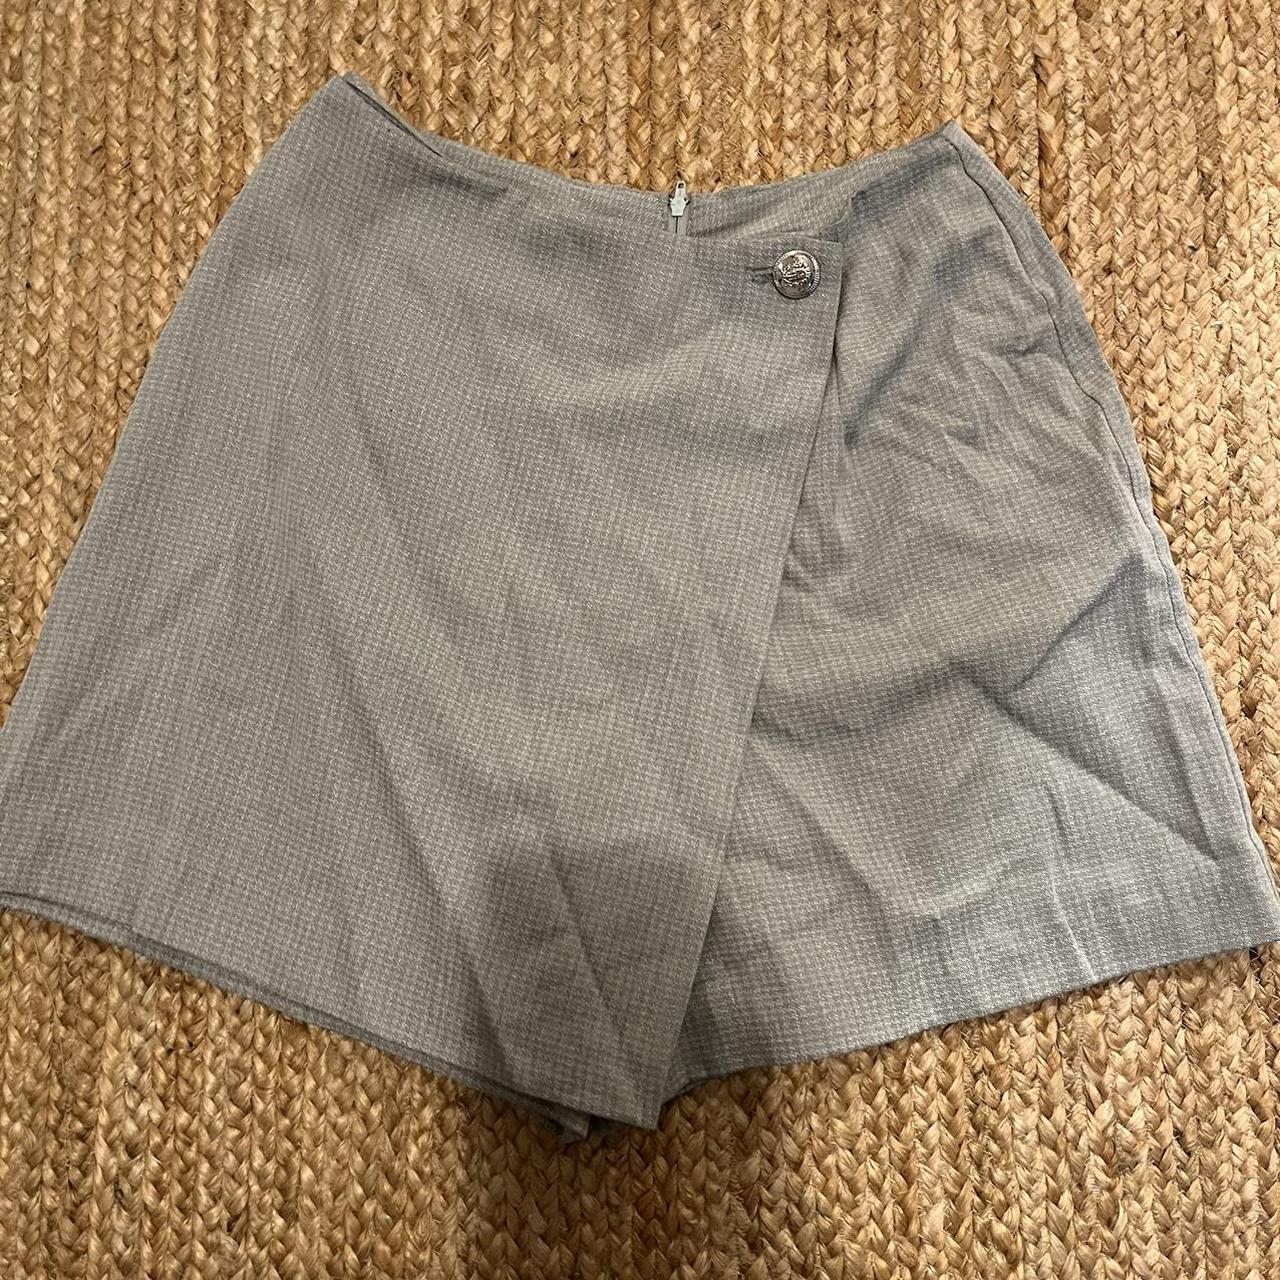 Women's Green and White Shorts | Depop